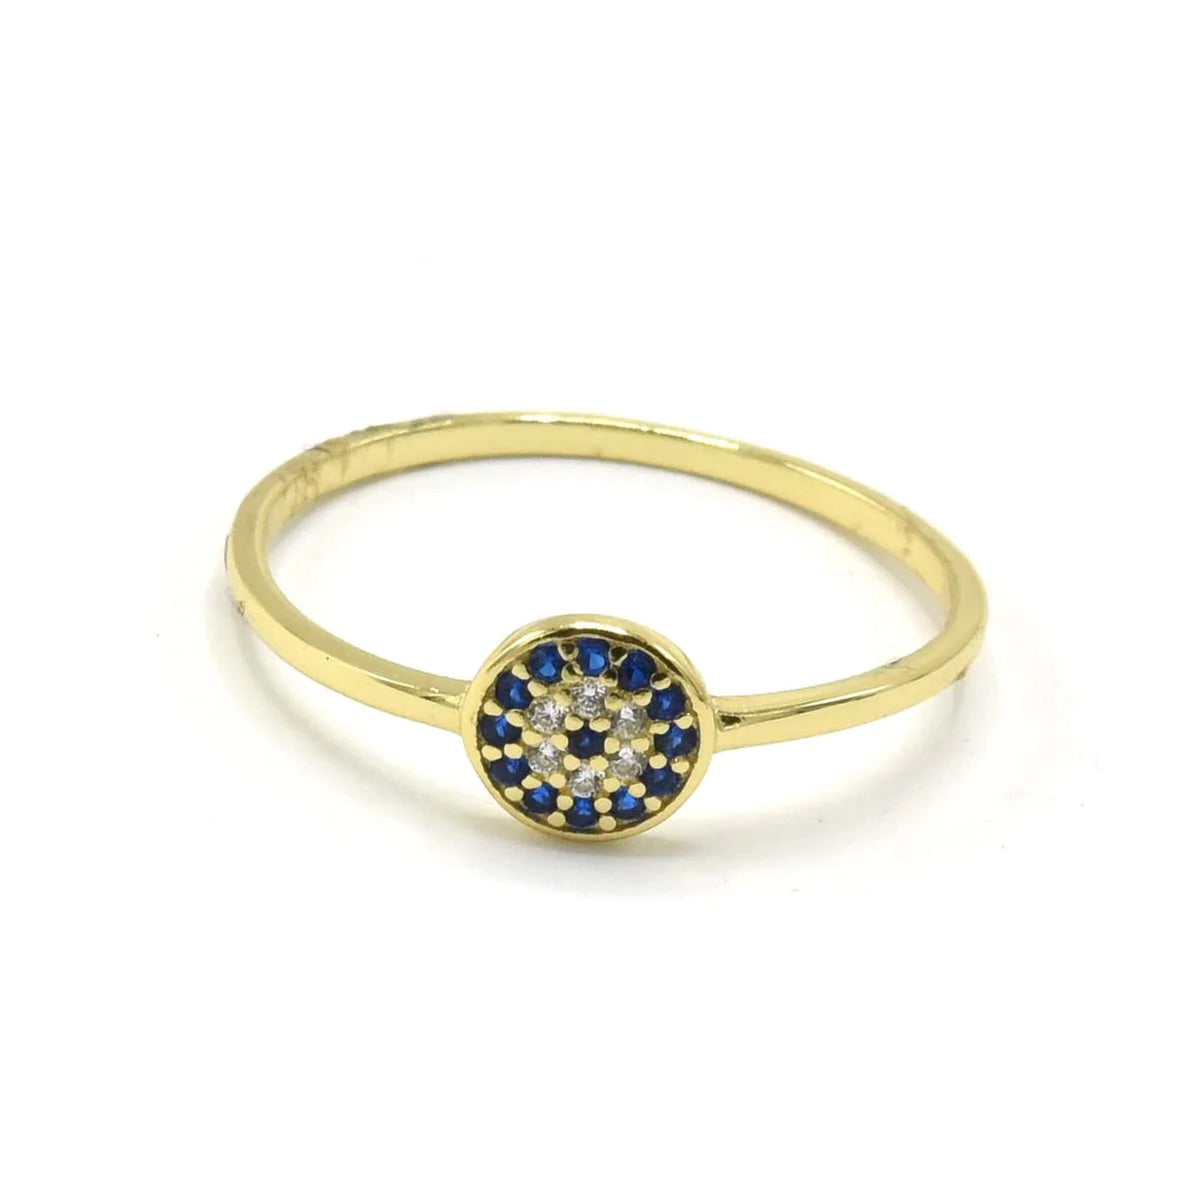 rings, jewelry, accessories, fashion jewelry, evil eye rings, dainty rings, white gold rings, fine jewelry, round evil eye tiny ring, rings that wont turn green with water, gift ideas, birthday gift ideas, anniversary gift ideas, affordable fine jewelry, rings with rhinestones, rings with cubic zirconia, nice rings, trending on tiktok and instagram, jewelry store in Miami, top jewelry stores, evil eye jewelry, evil eye accessories, protection jewelry, good luck items. gold evil eye rings, gold vermeil 